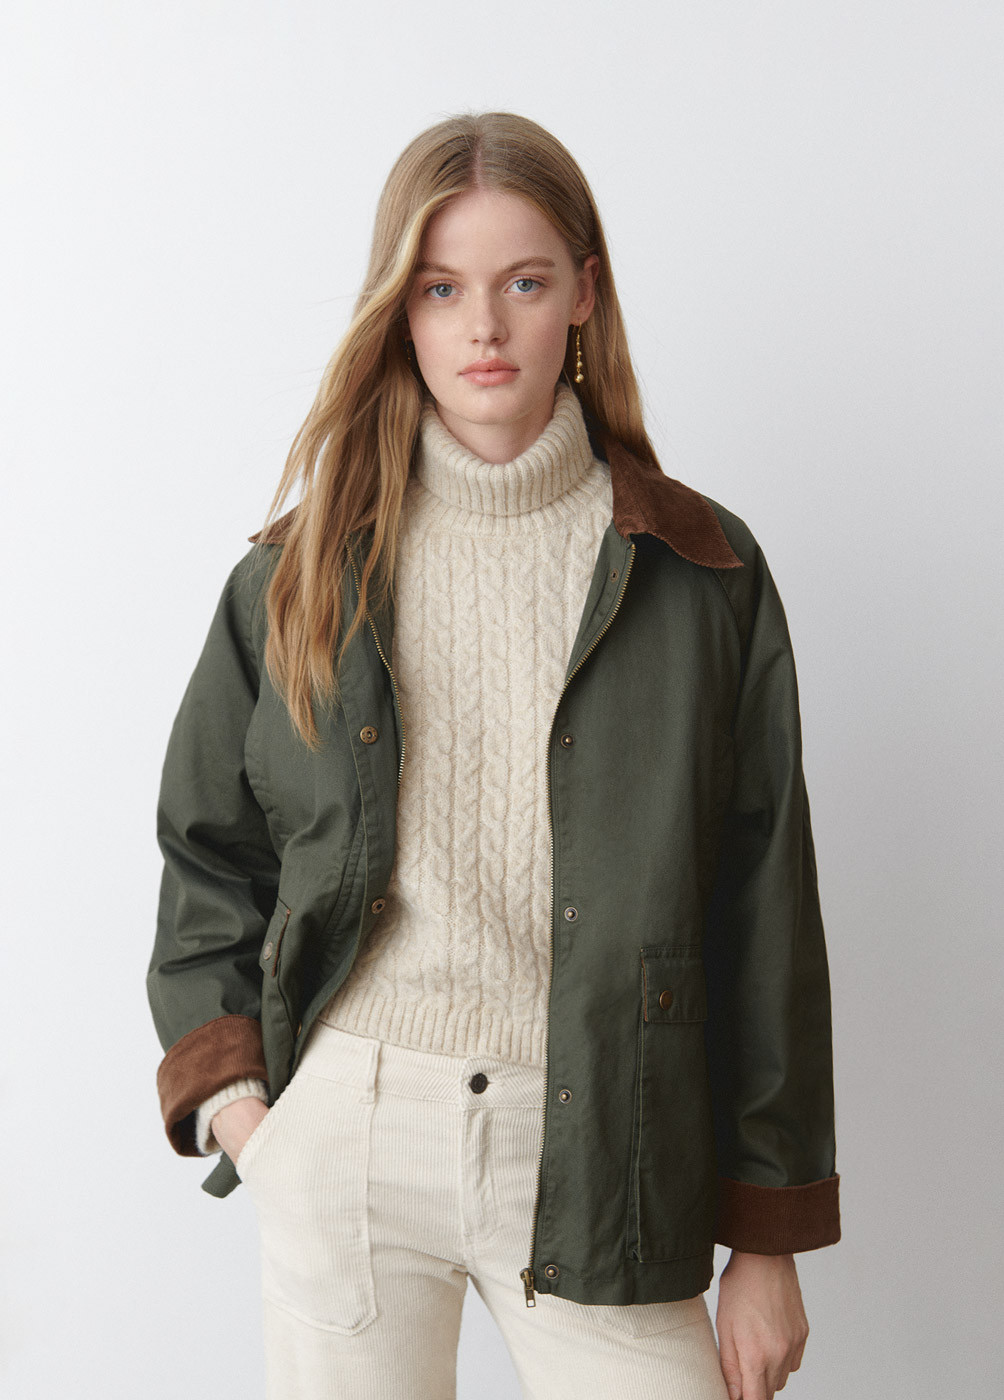 Shop Women's Coats, Jackets, Blazers and more | Brownie Spain